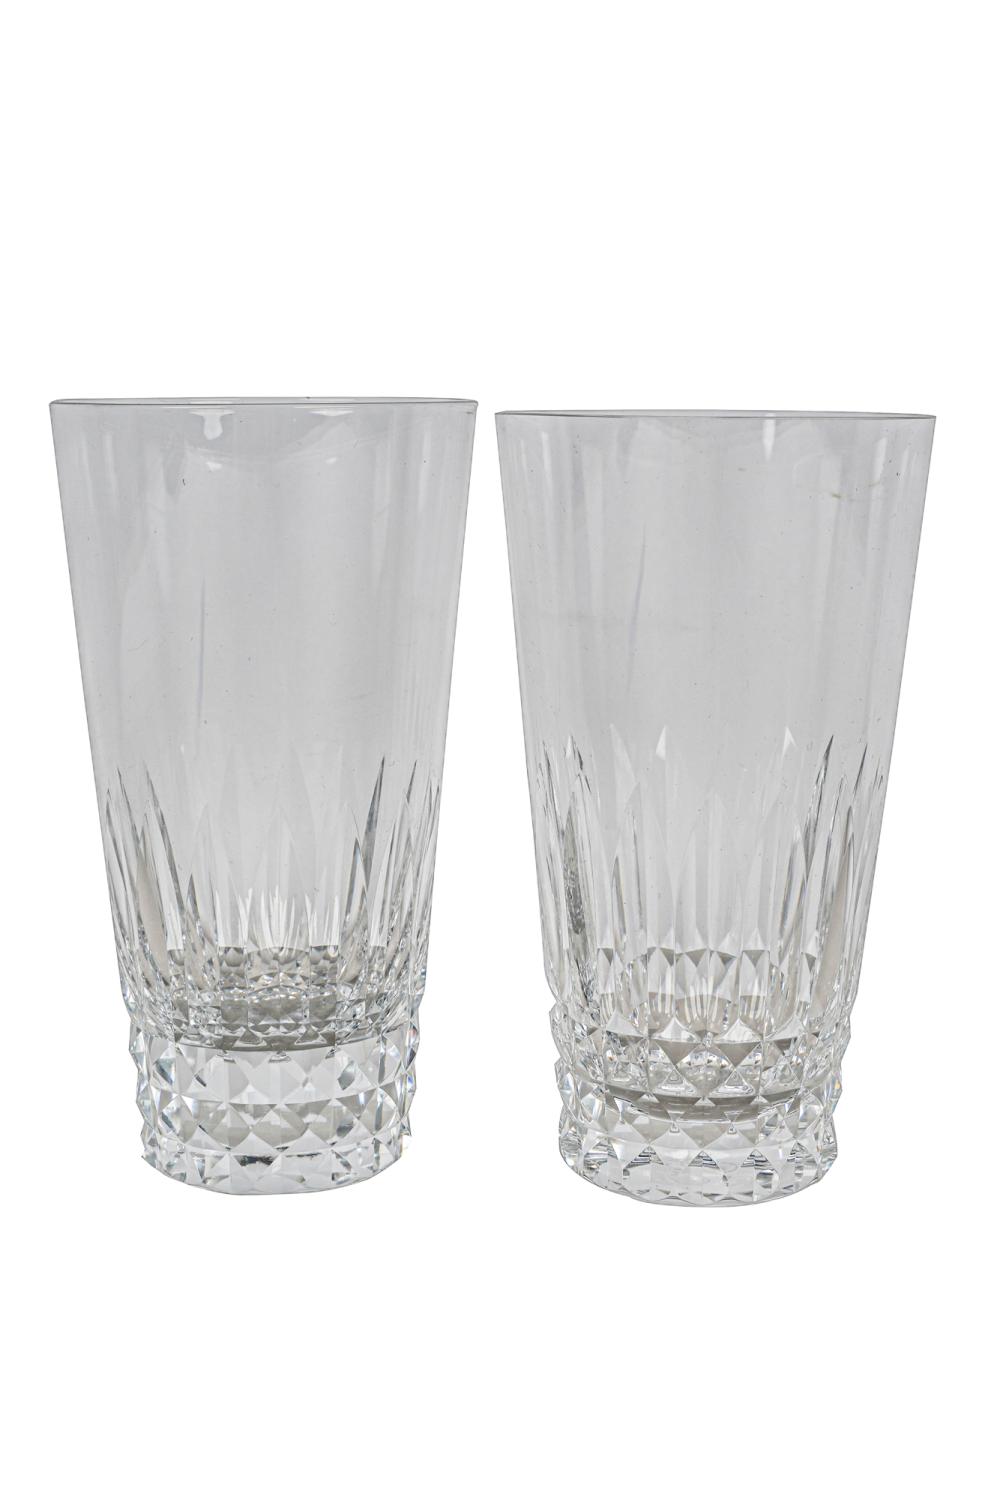 ELEVEN BACCARAT TUMBLERSeach signed 336ef7